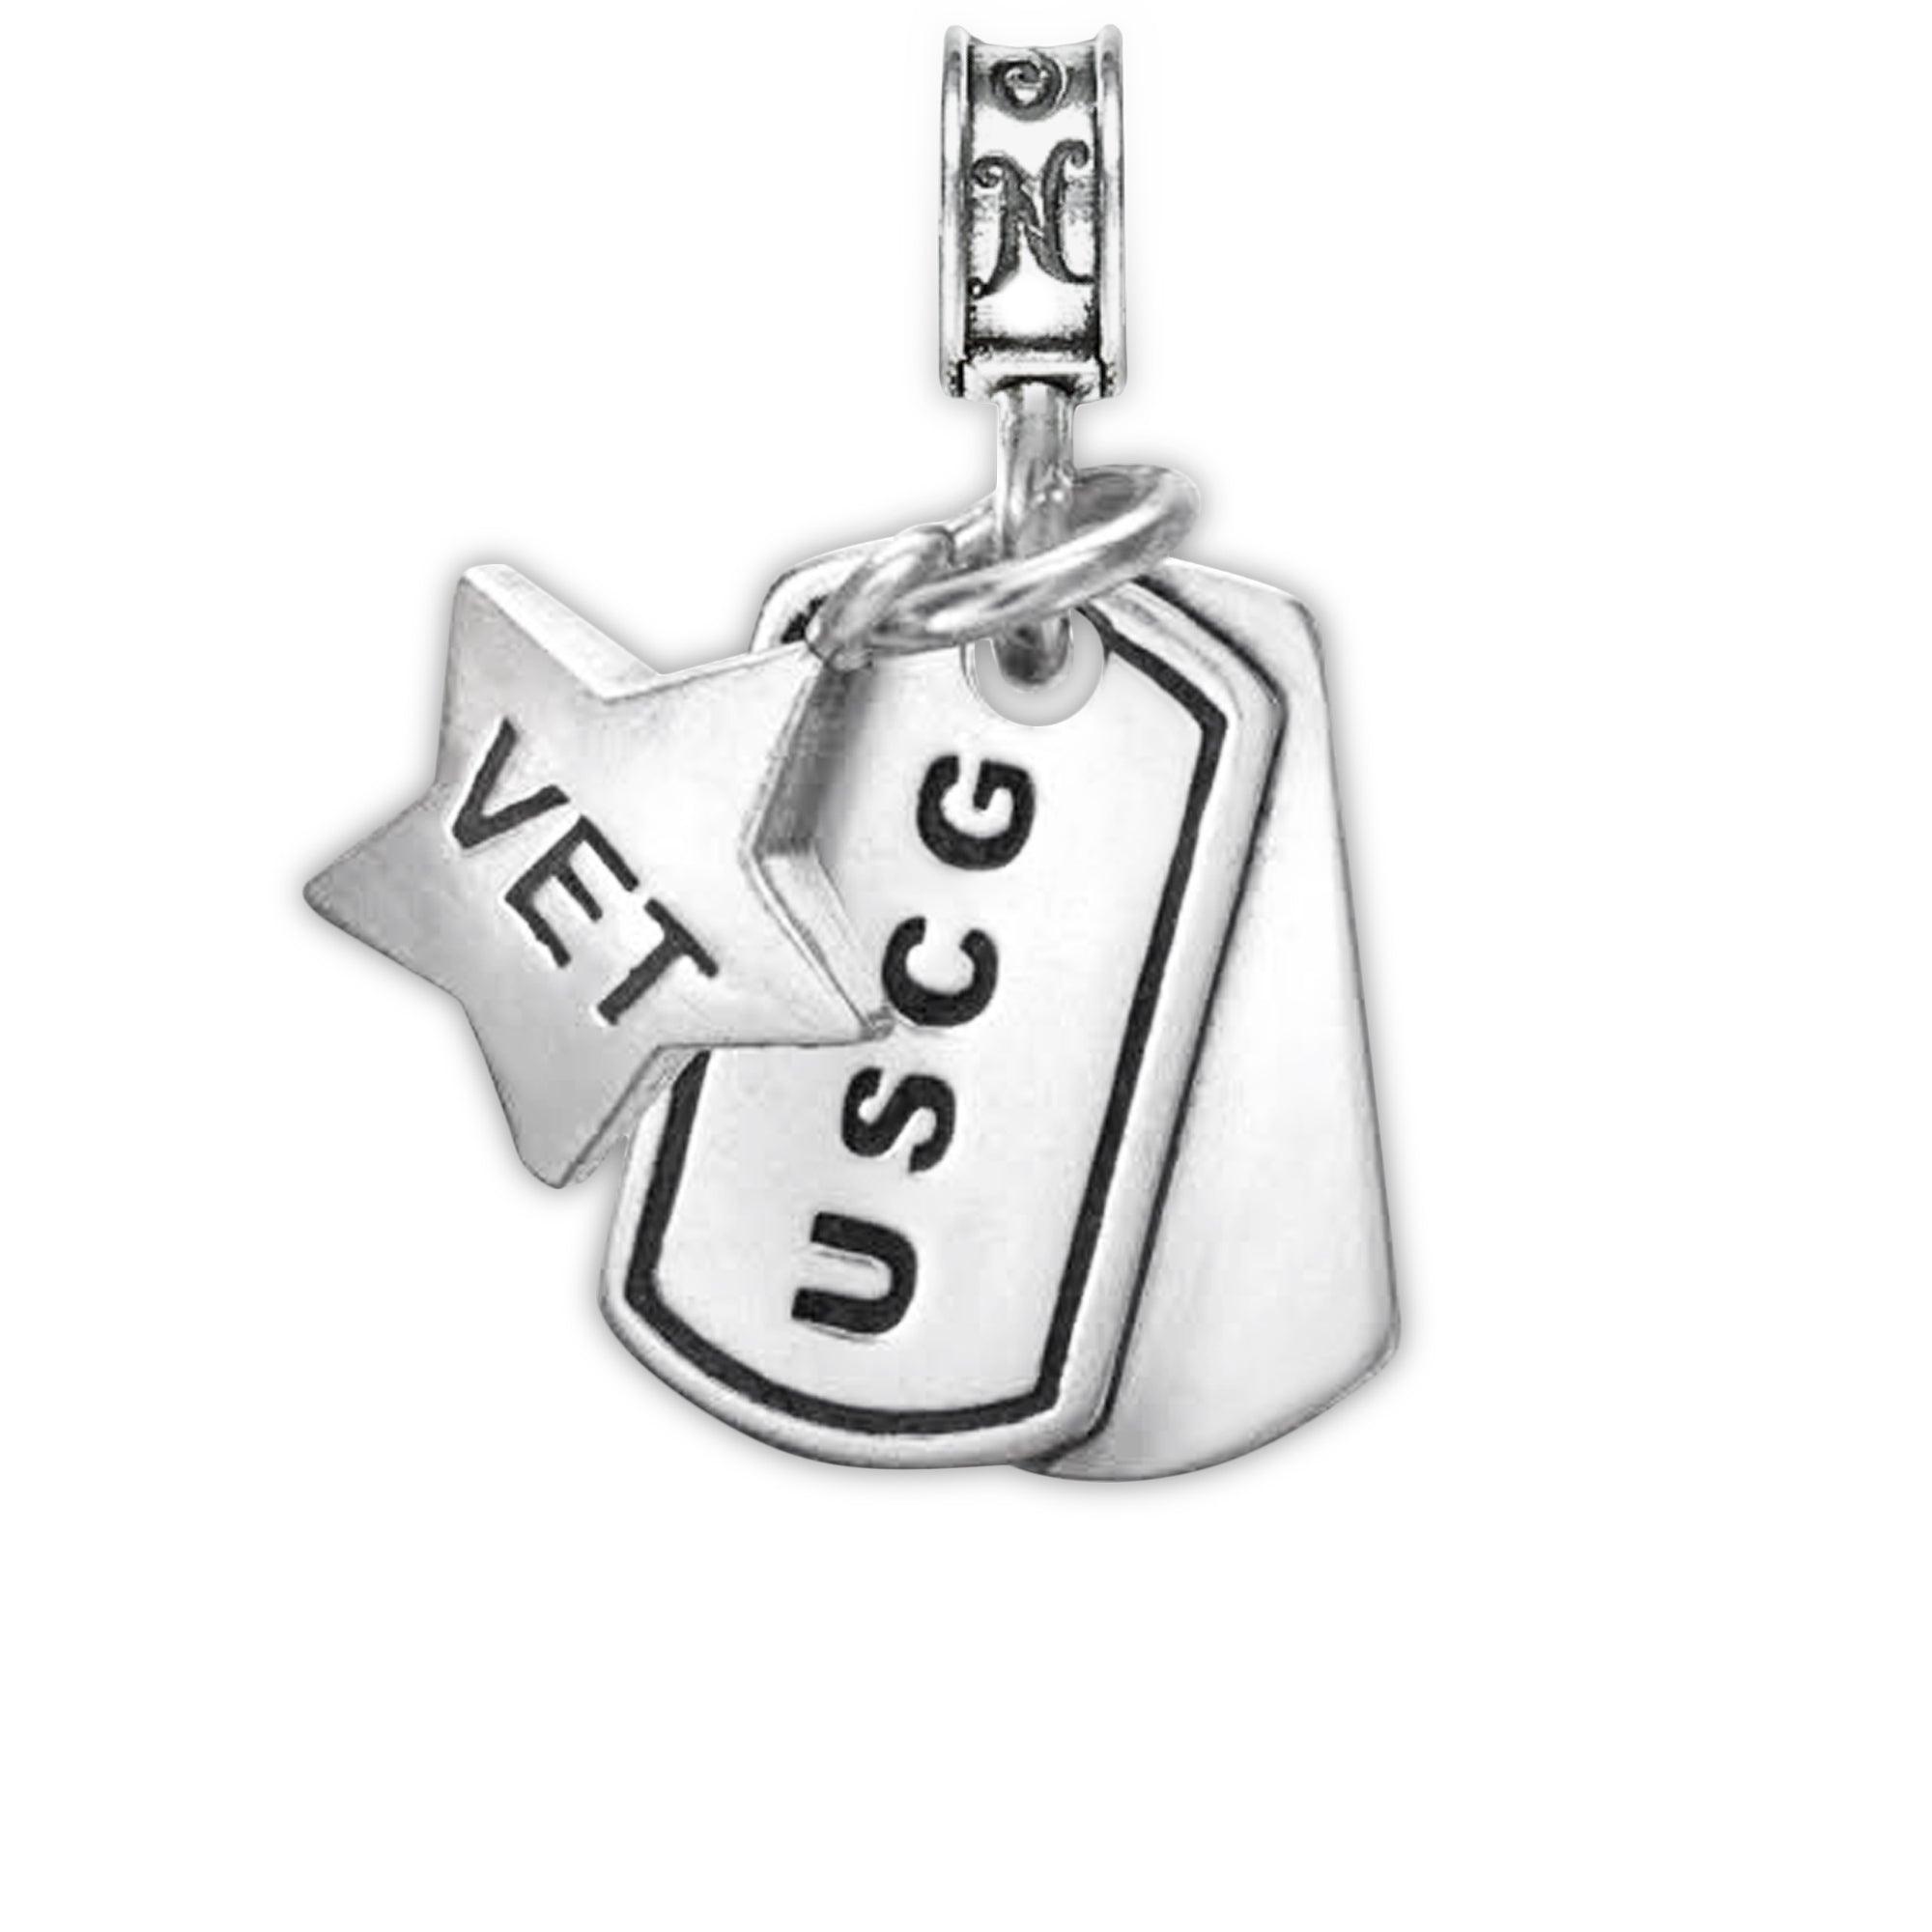 Military Jewelry, Military Charms, Military Gifts, United States Coast Guard, USCG Veteran